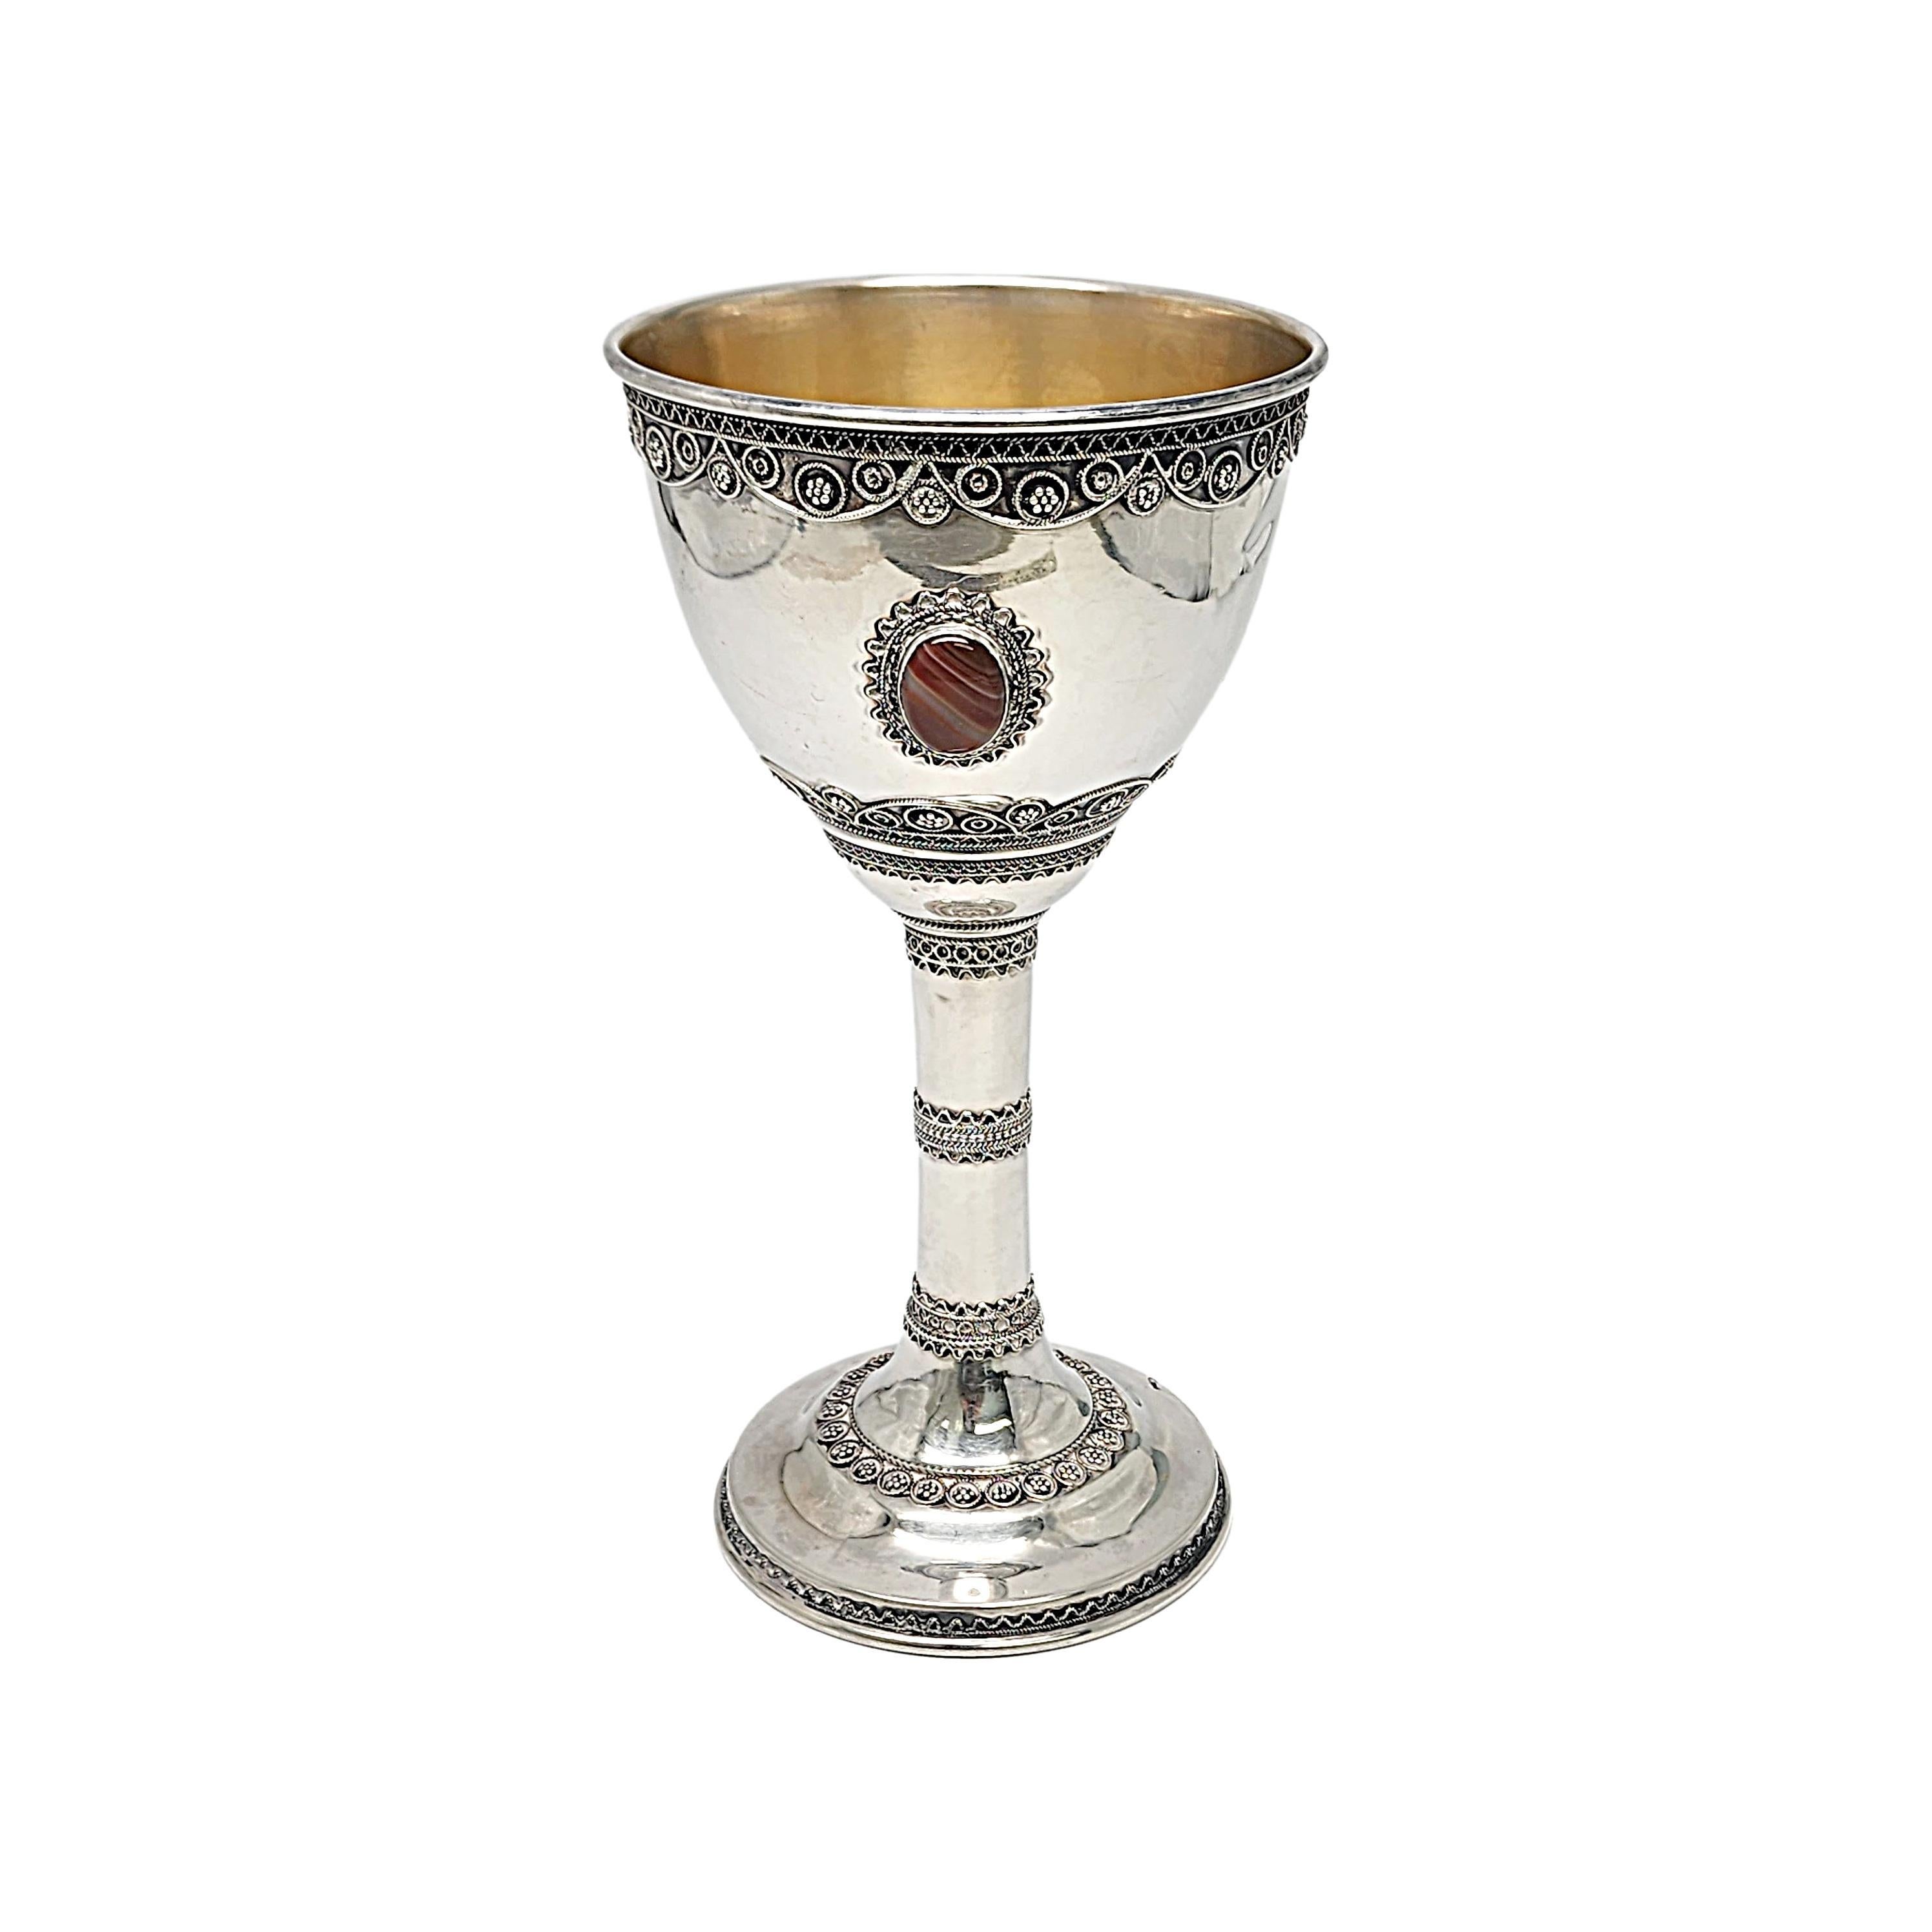 Sterling silver with gold wash interior 3 stones tall kiddush cup goblet by Zadok of Israel.

No monograms or engraving.

With a gold wash cup interior, this large cup/goblet features 3 bezel set stones and ornate filigree design accents. The stones